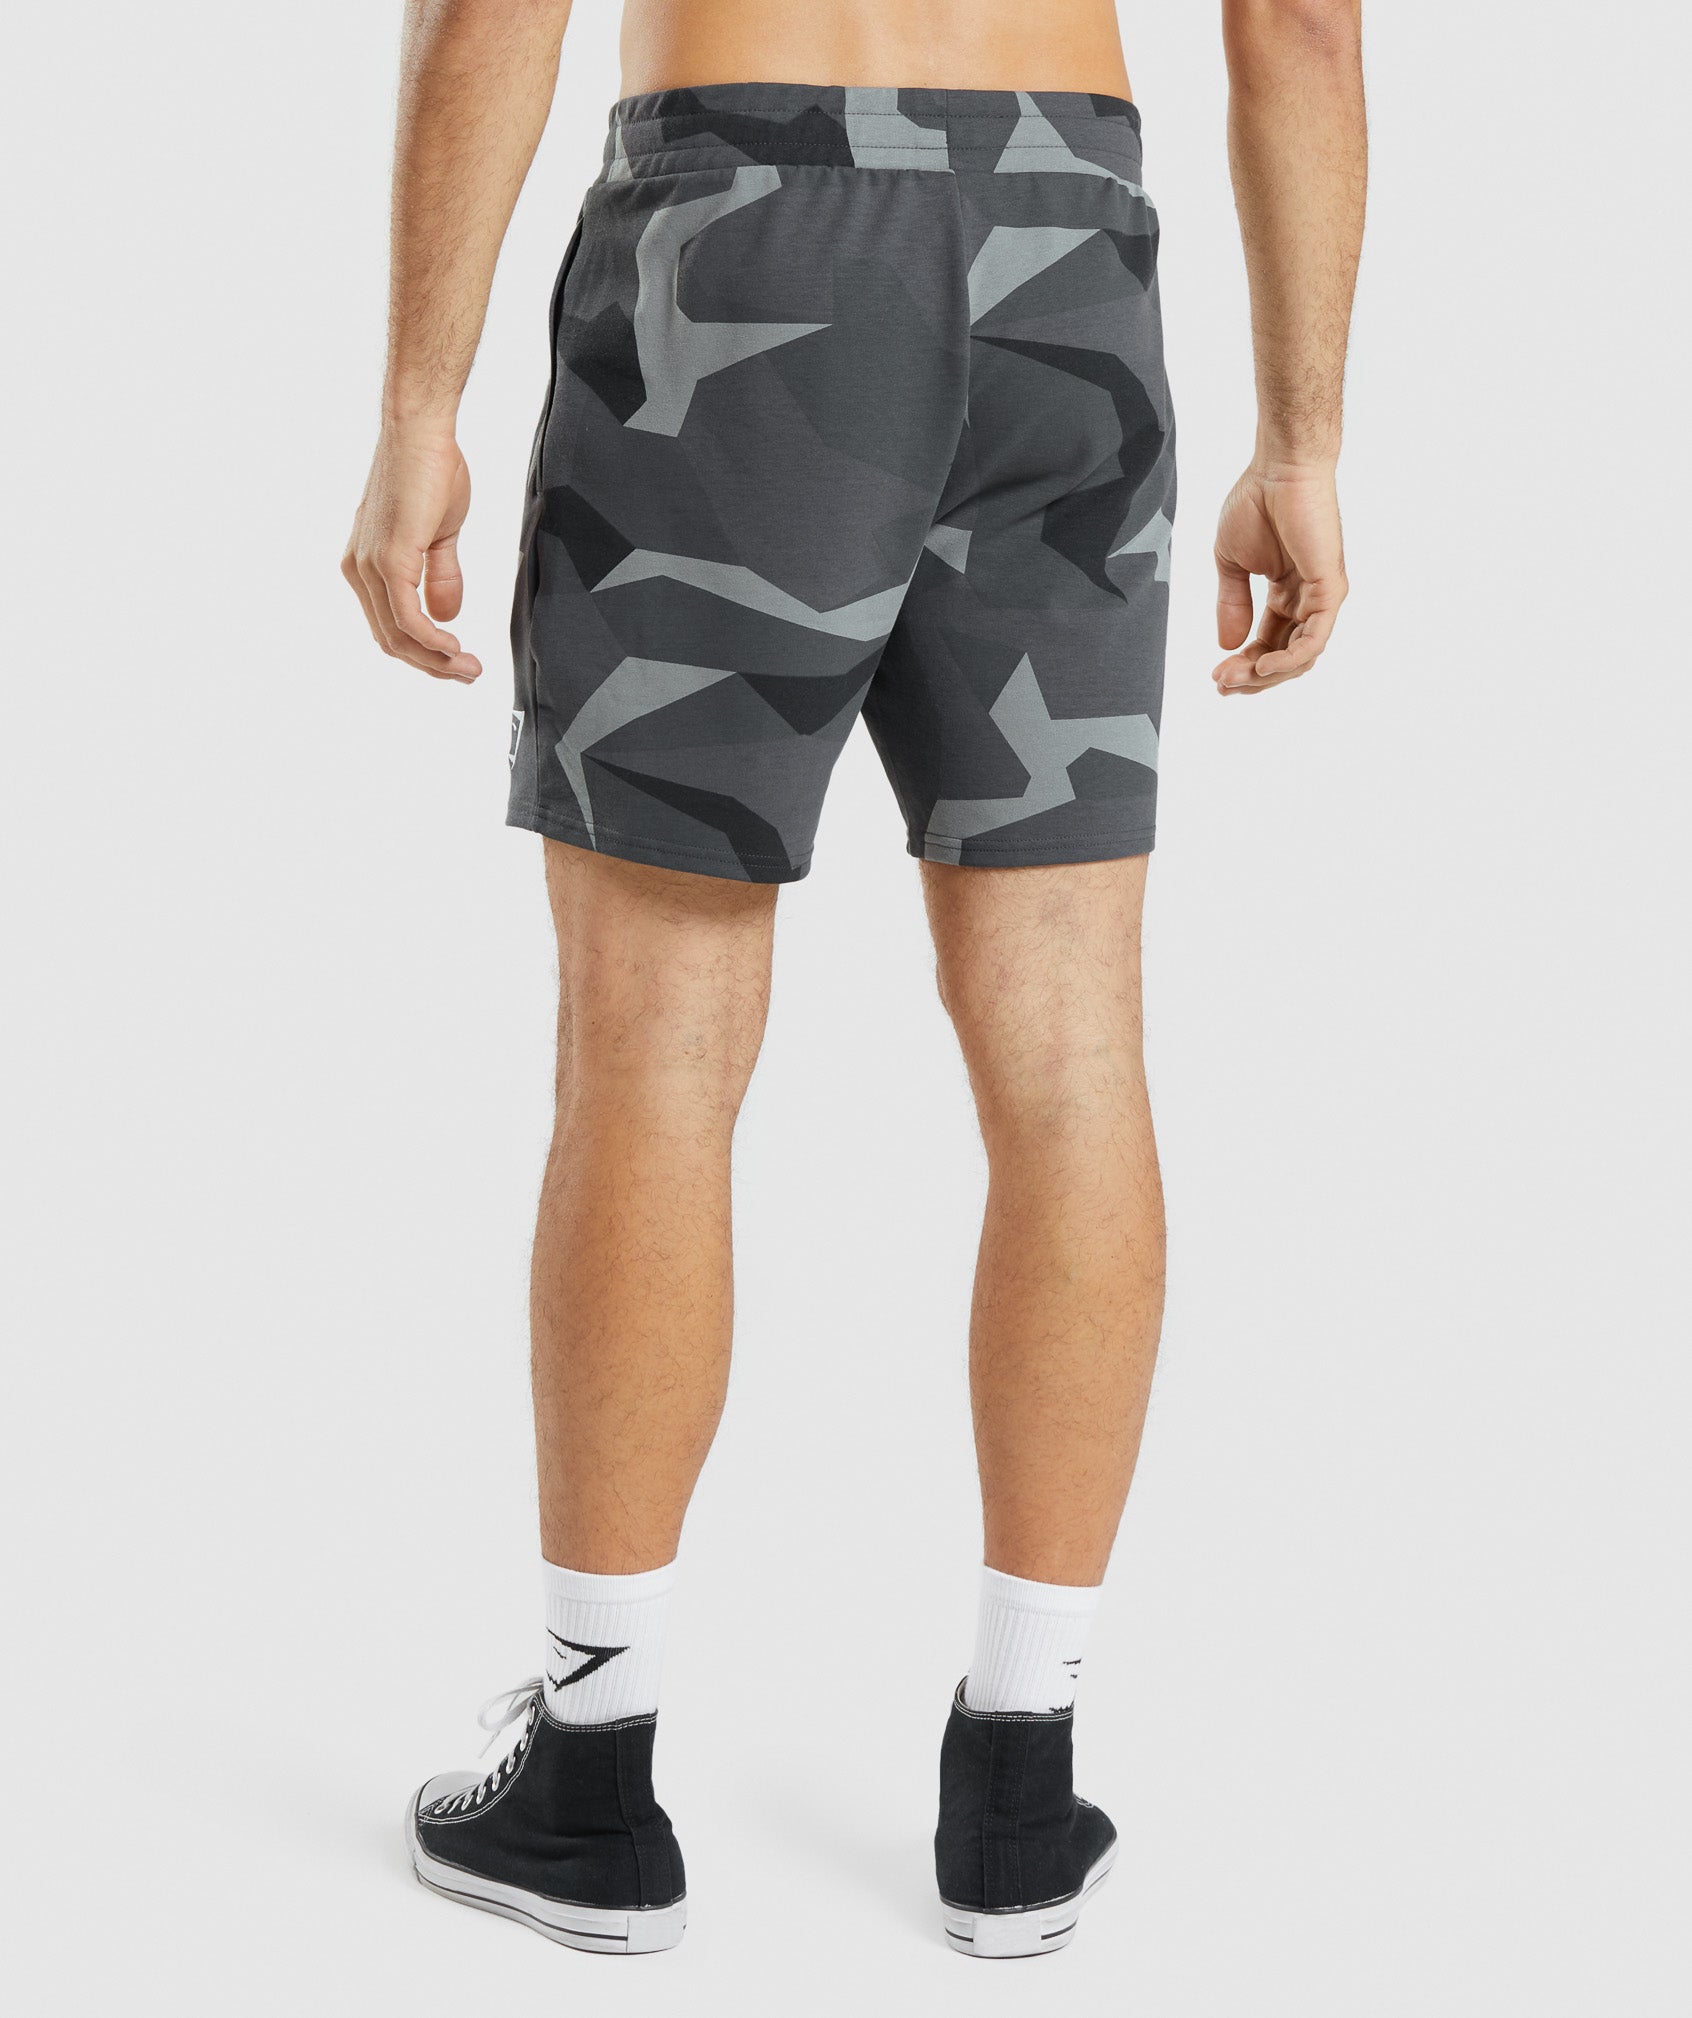 Critical 7" Shorts in Black Print - view 2